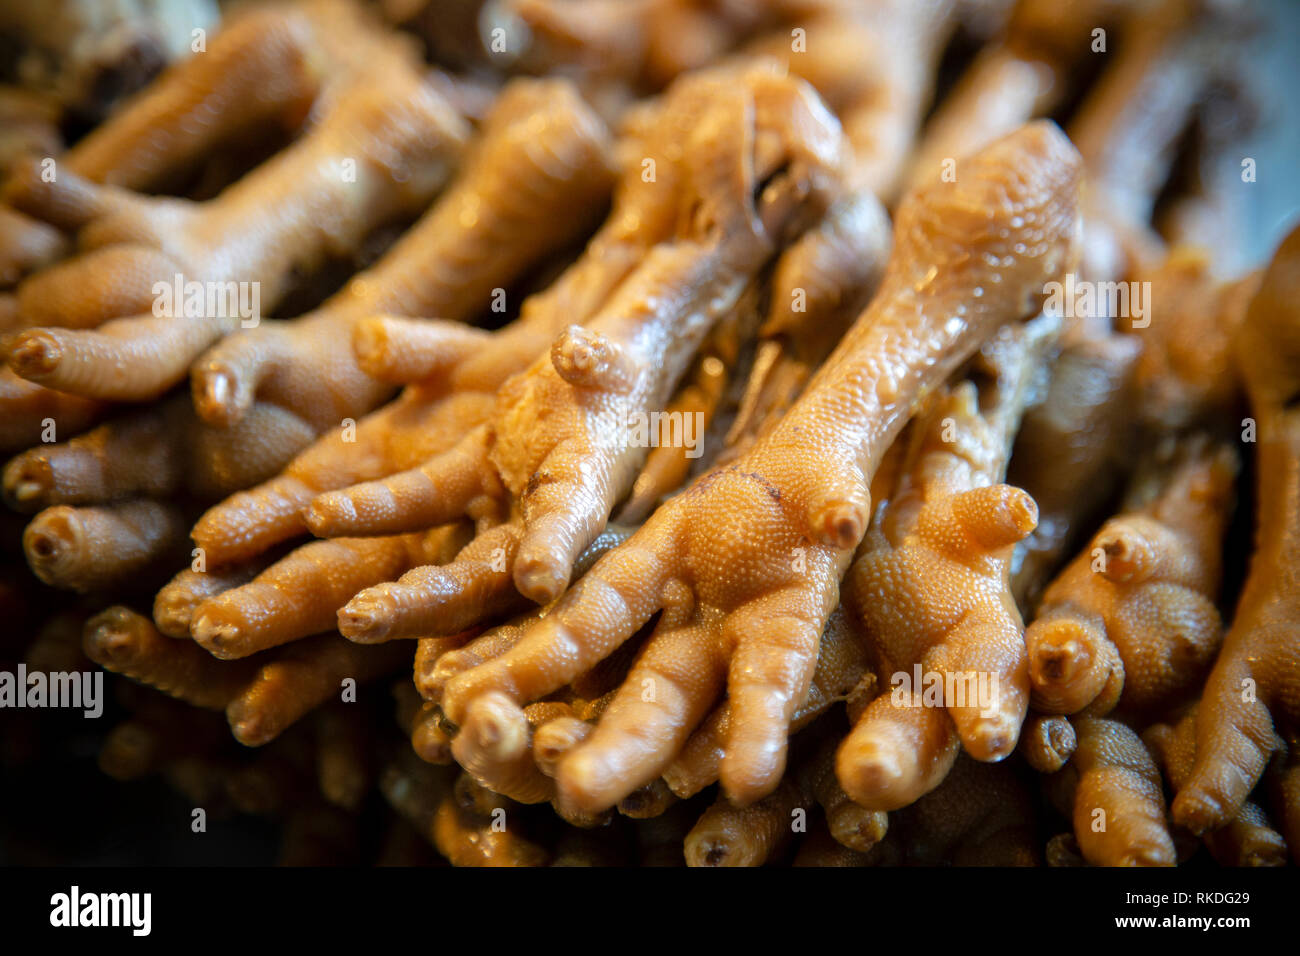 Thai Chinese style steamed cooked chicken feet at a street food market in Phuket, Thailand. Stock Photo